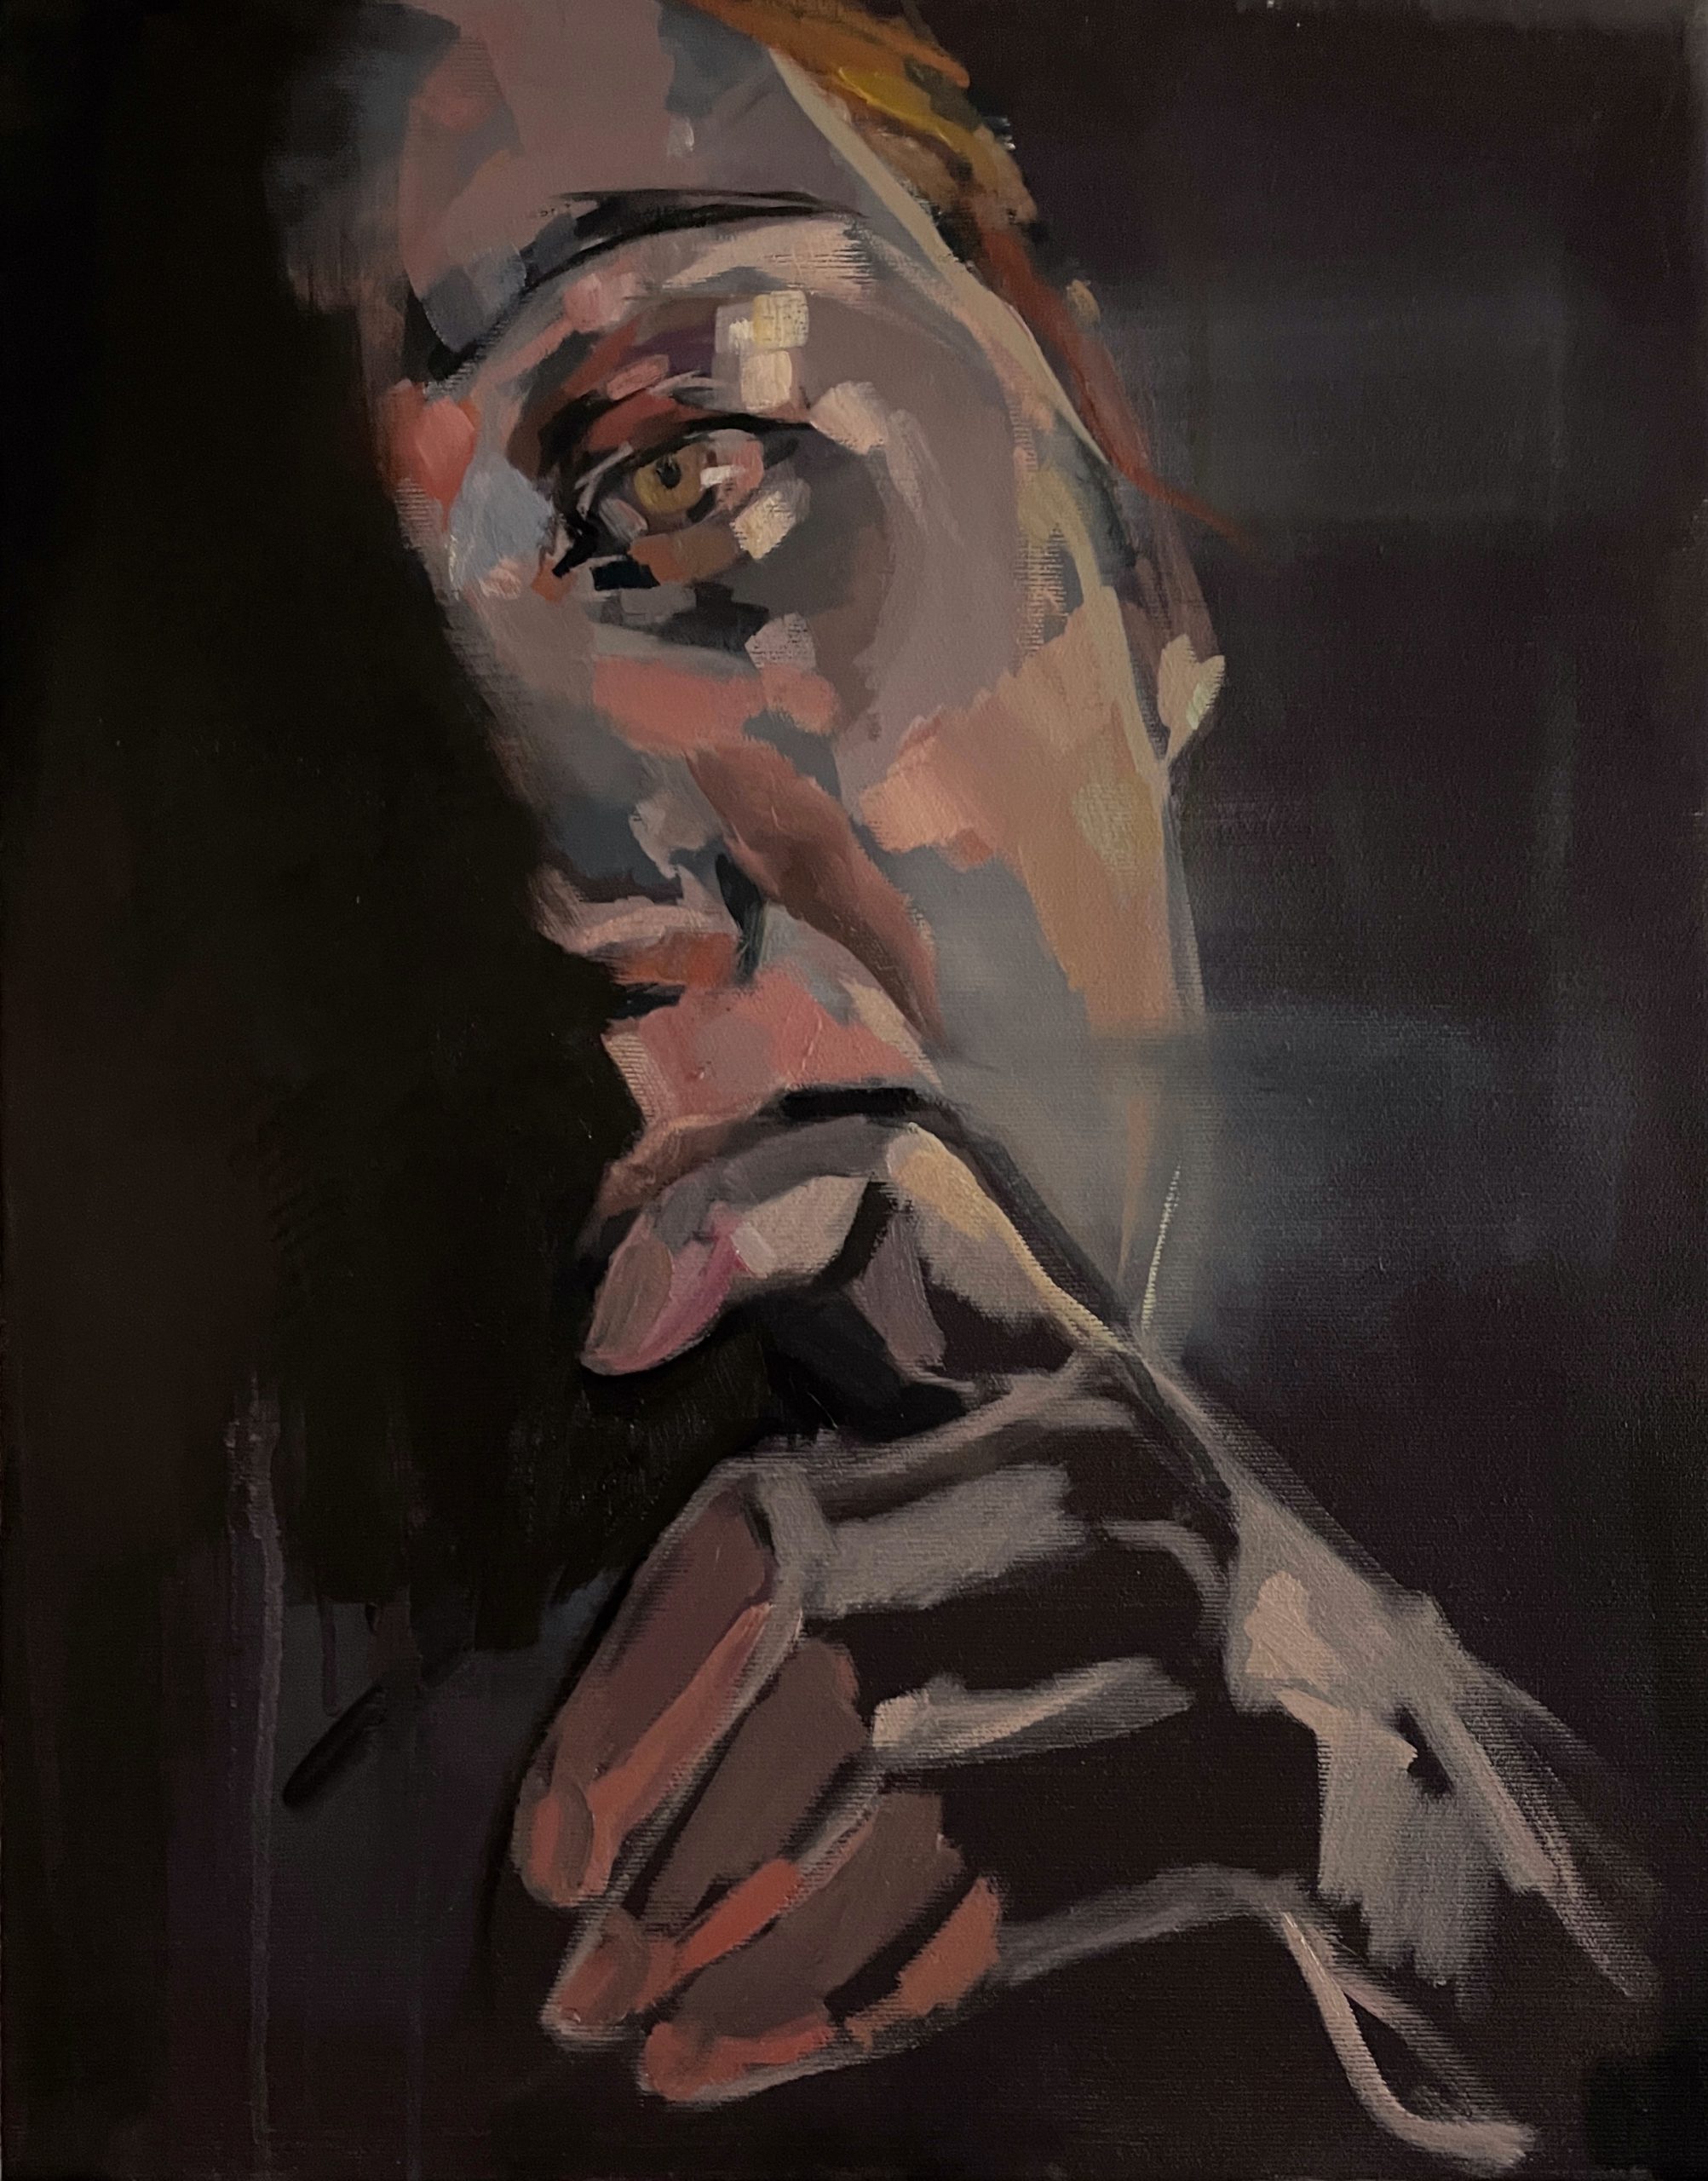 The self-portrait is part of the series "Alone. Pandemic Edition" and was created in 2020 in complete isolation. It shows a snapshot of my own biography, but also of an entire society that was suddenly confronted with itself, its own reflection and its own emotions as a result of the pandemic and its enforced standstill.